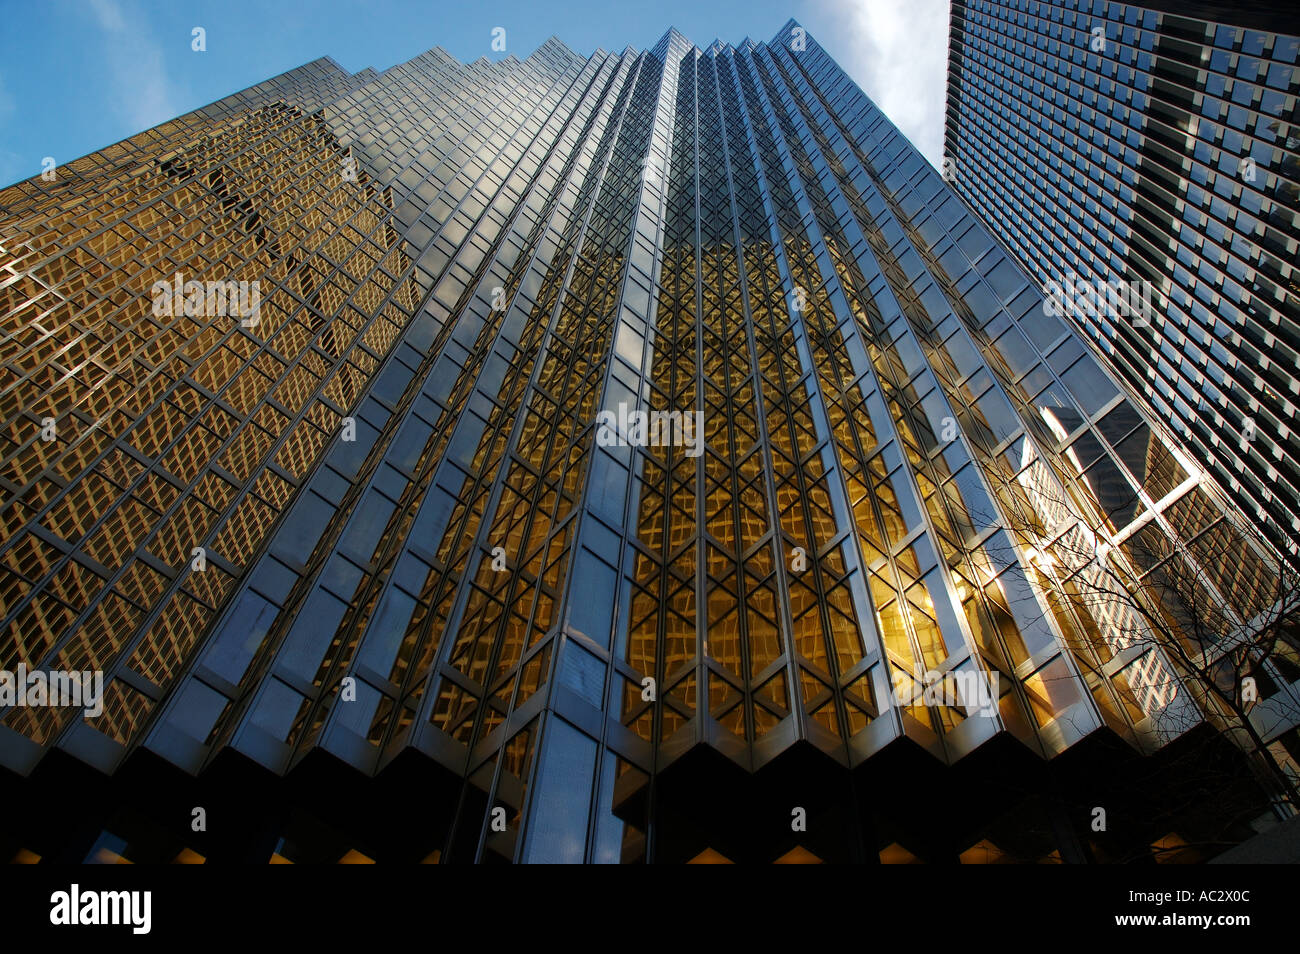 Looking up at gold highrise bank towers in Toronto Stock Photo